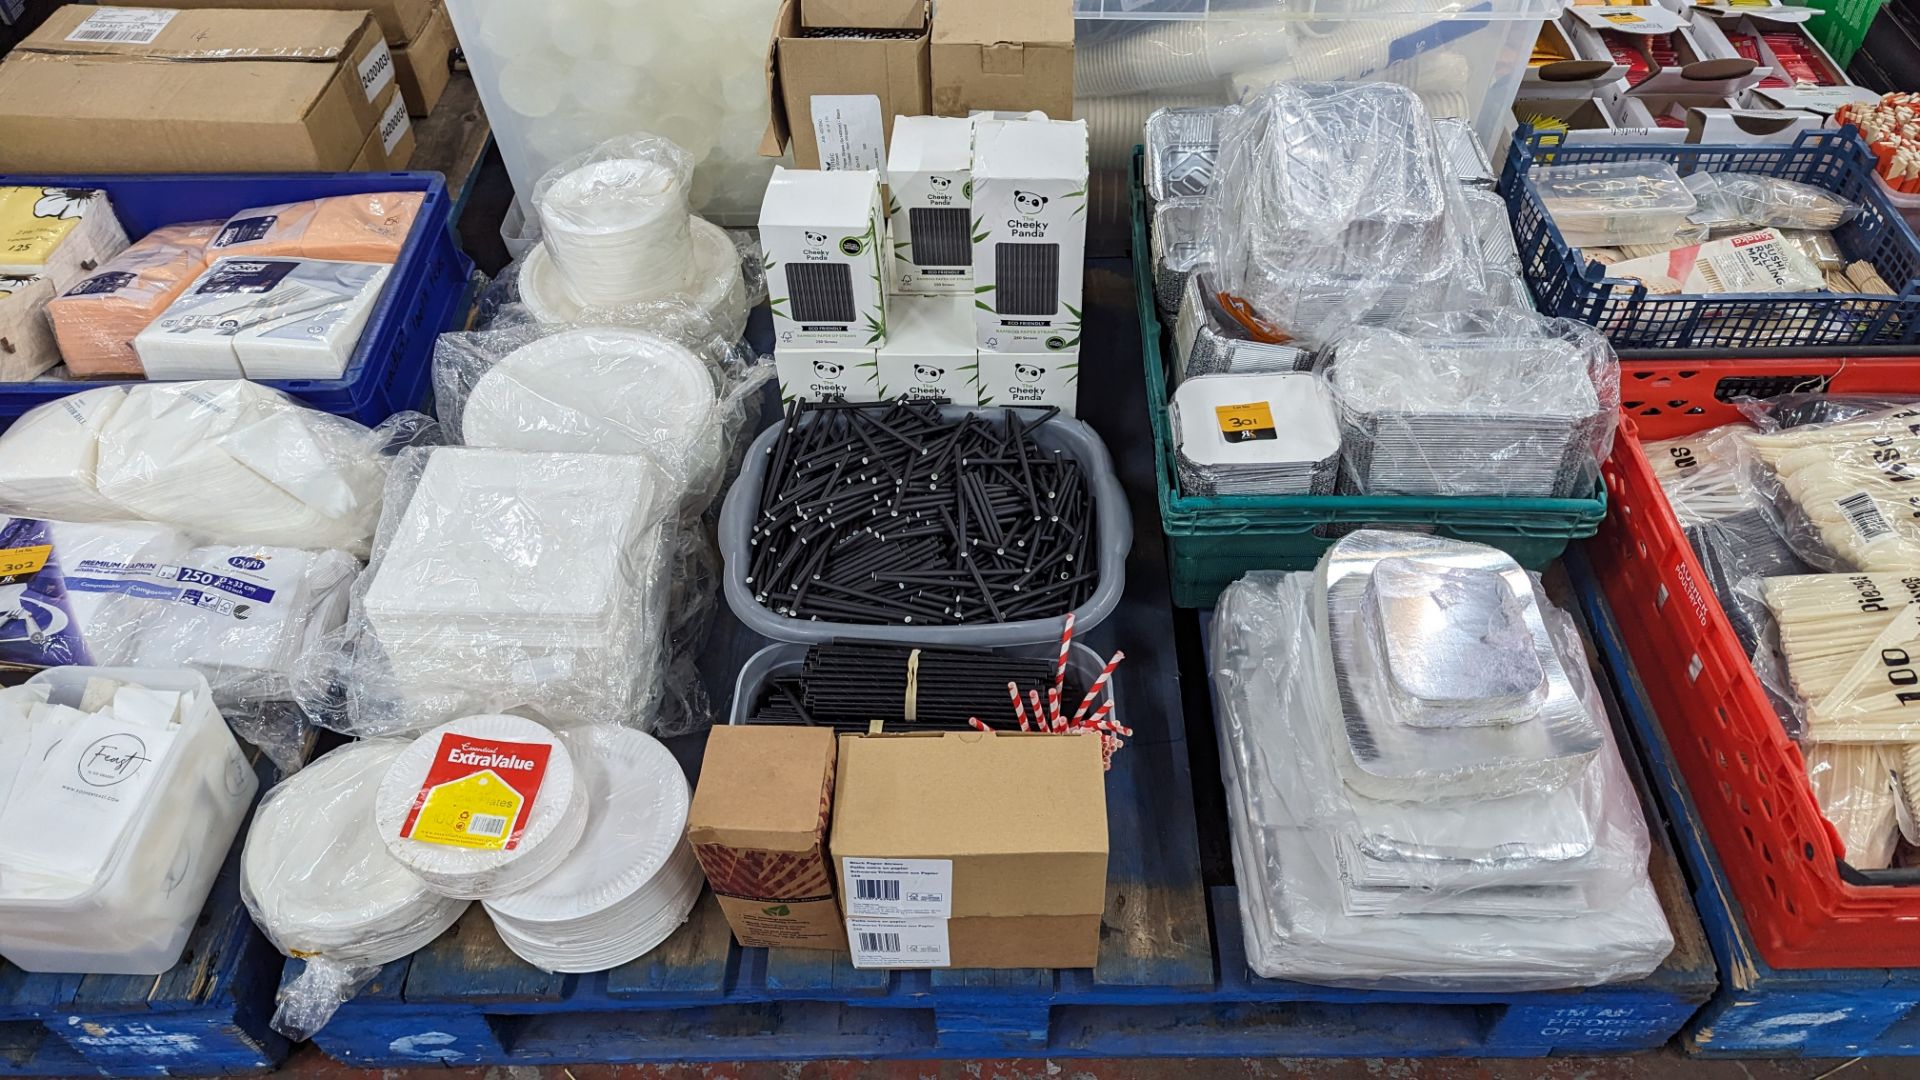 The contents of a pallet of disposable items including foil trays & lids, straws, plates & more. NB